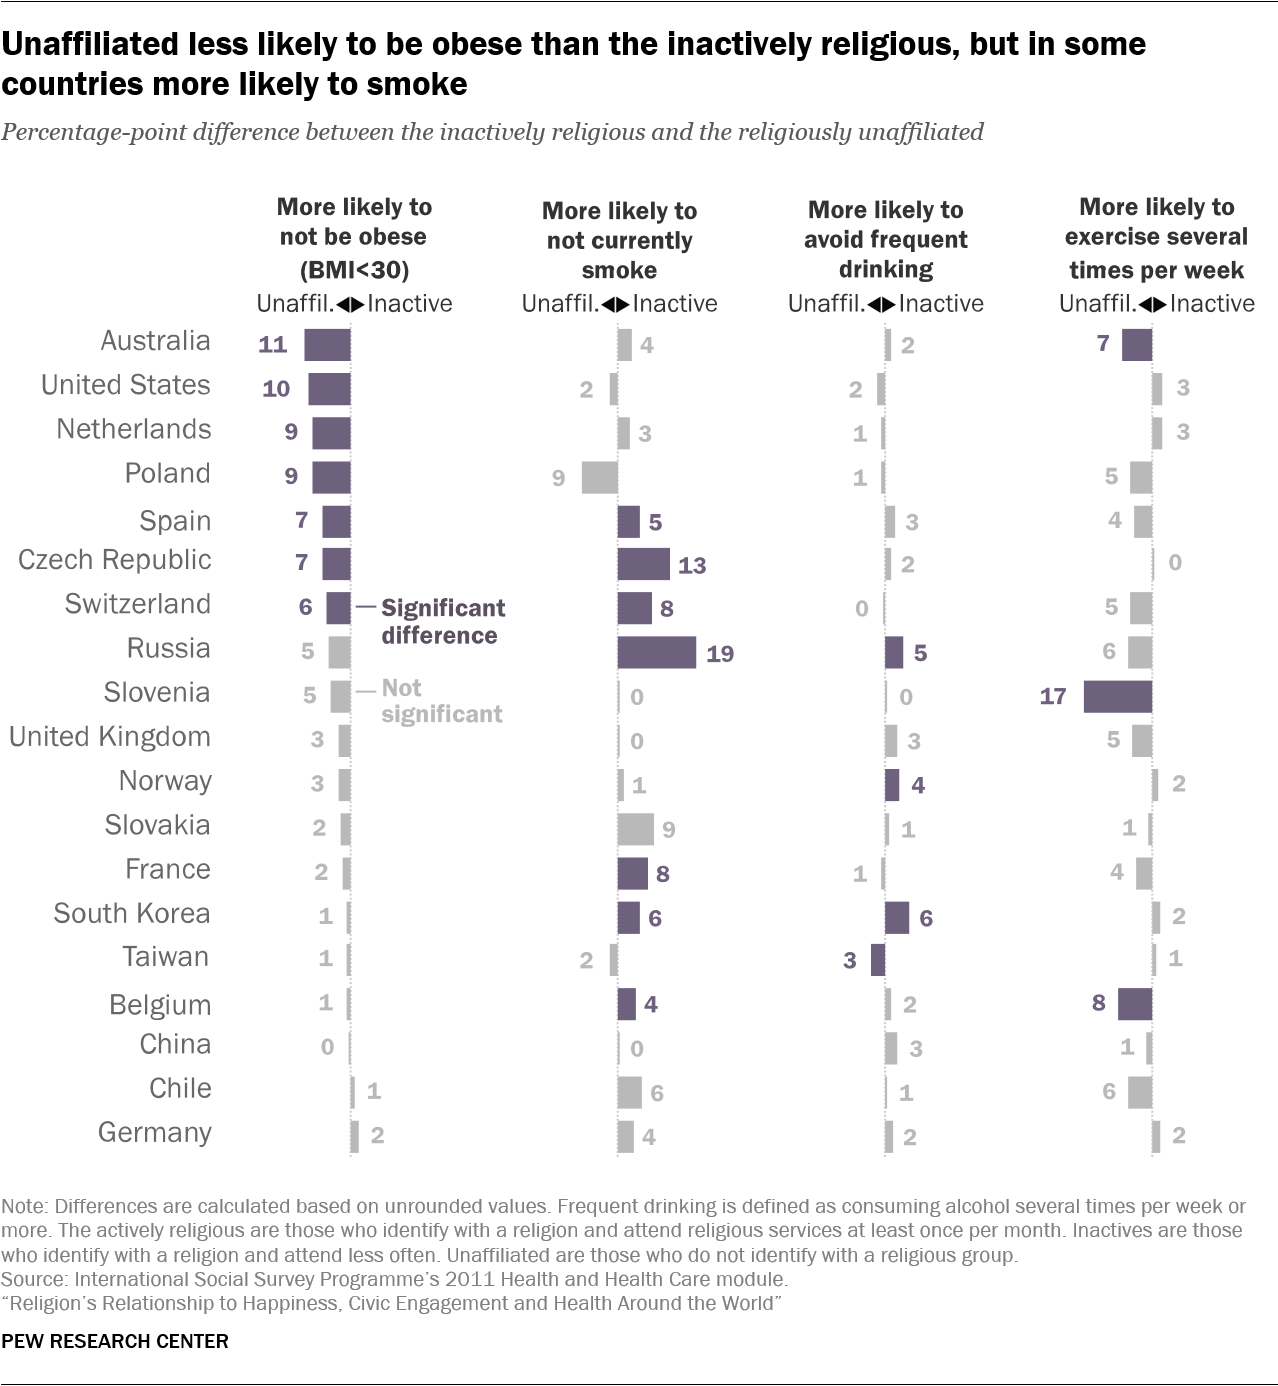 Unaffiliated less likely to be obese than the inactively religious, but in some countries more likely to smoke 